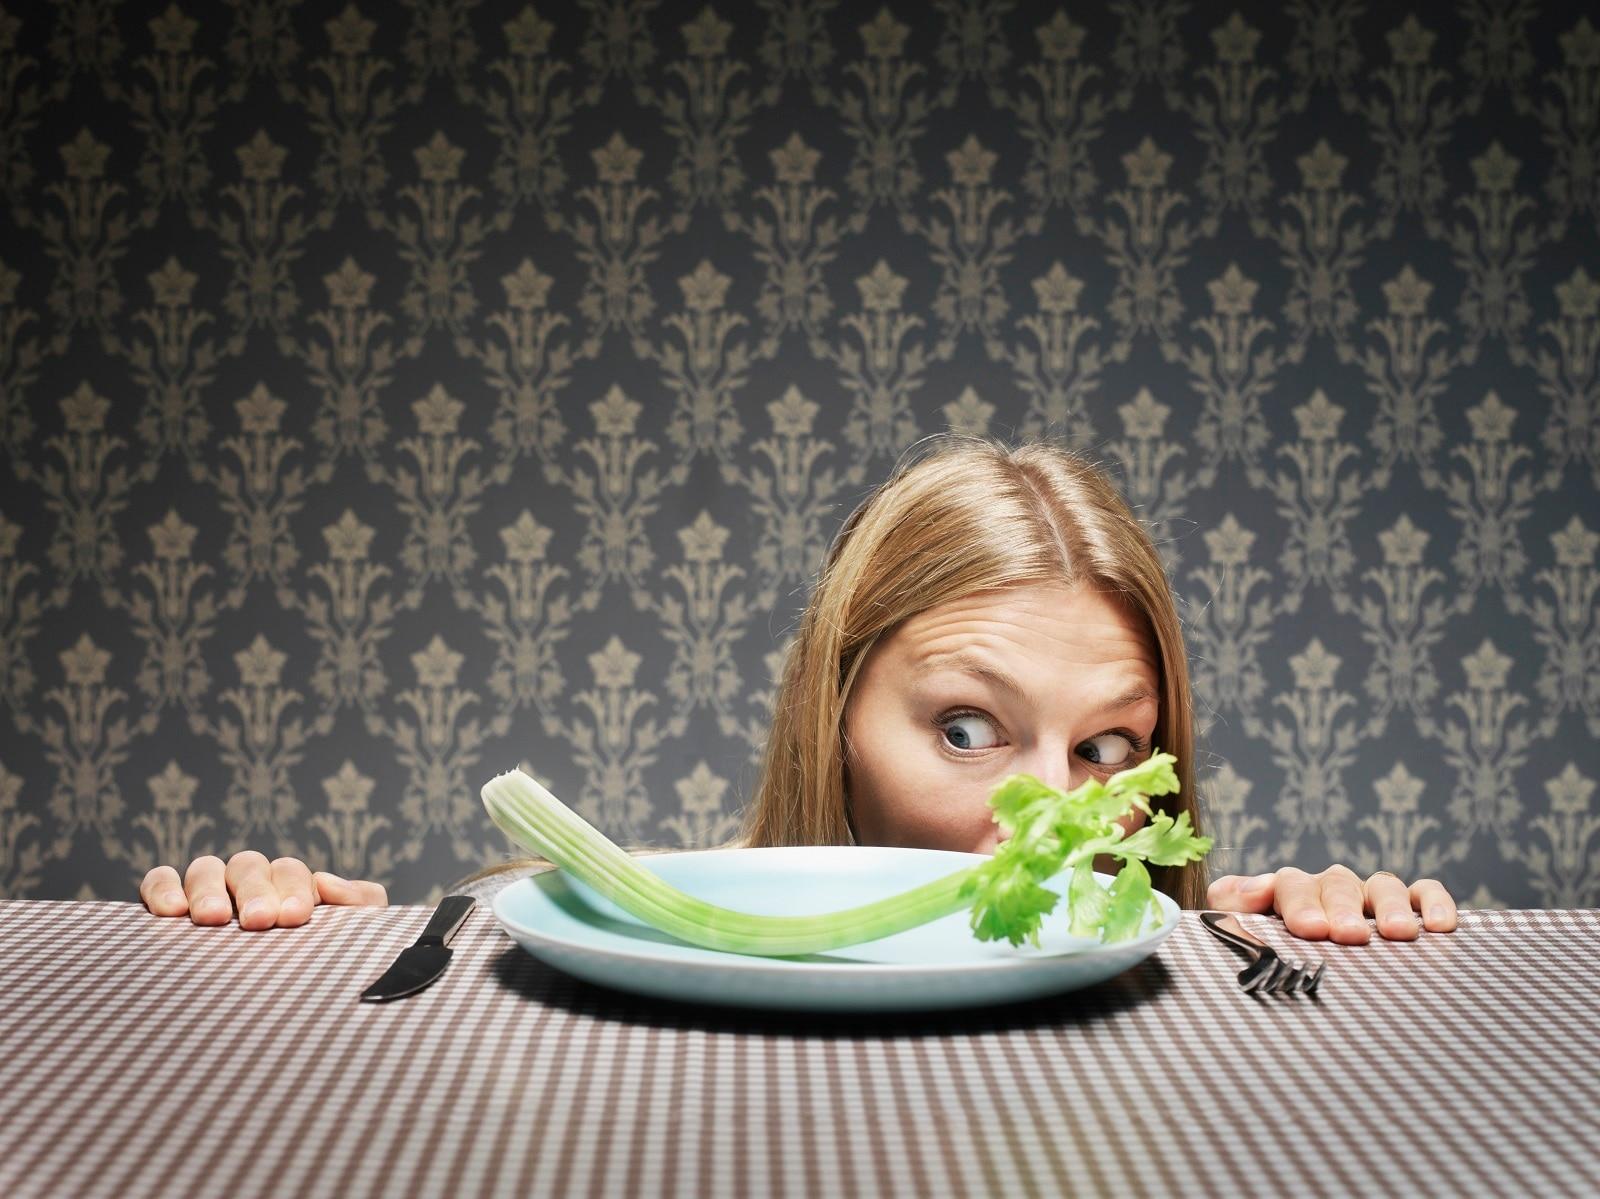 A woman stares skeptically at a piece of celery on an otherwise empty plate.